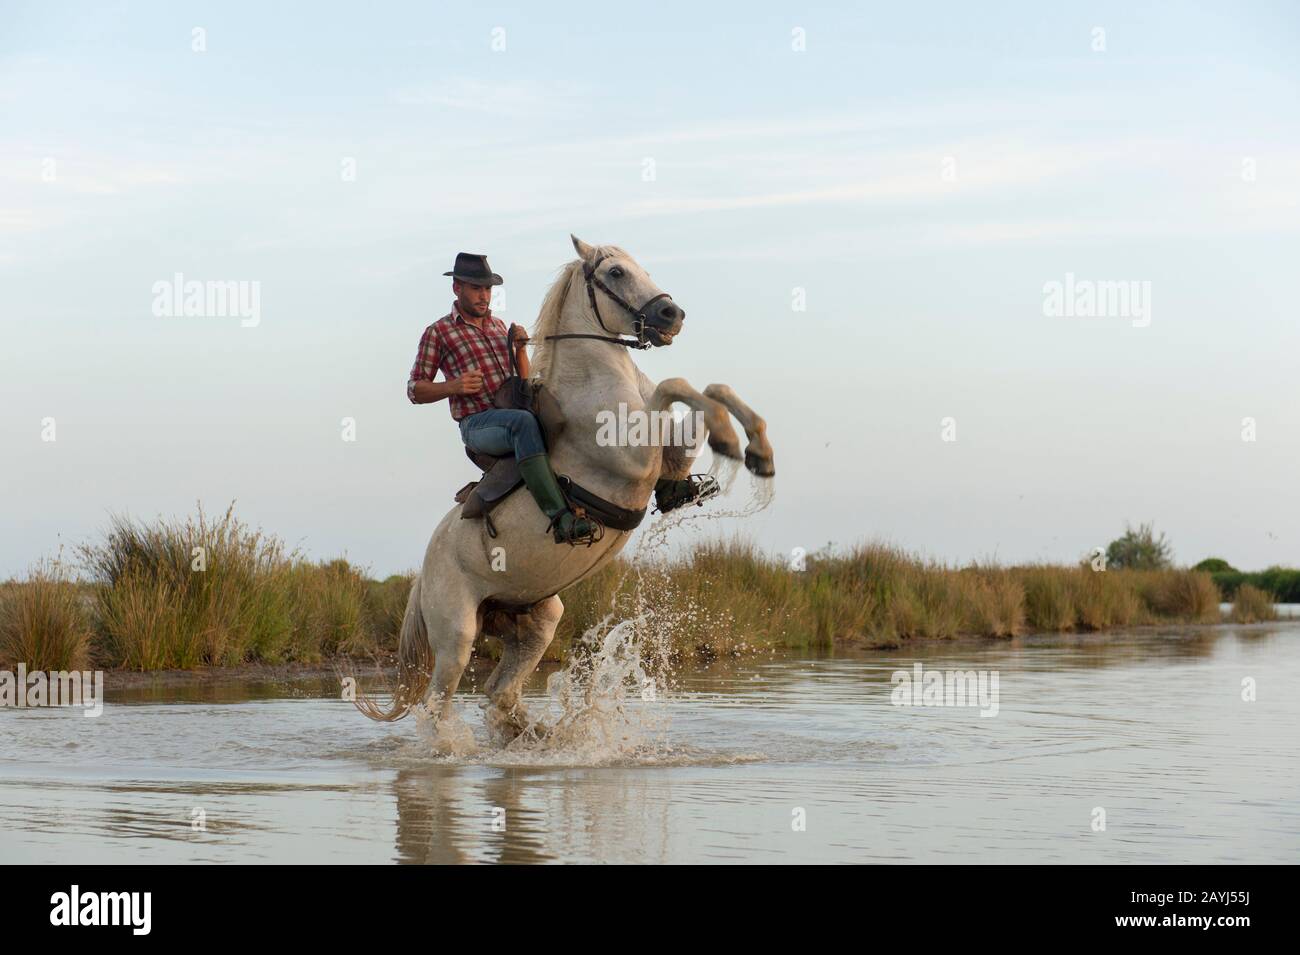 A Camargue Guardian (Camargue cowboy) rearing up his horse in a marsh of the Camargue in southern France. Stock Photo